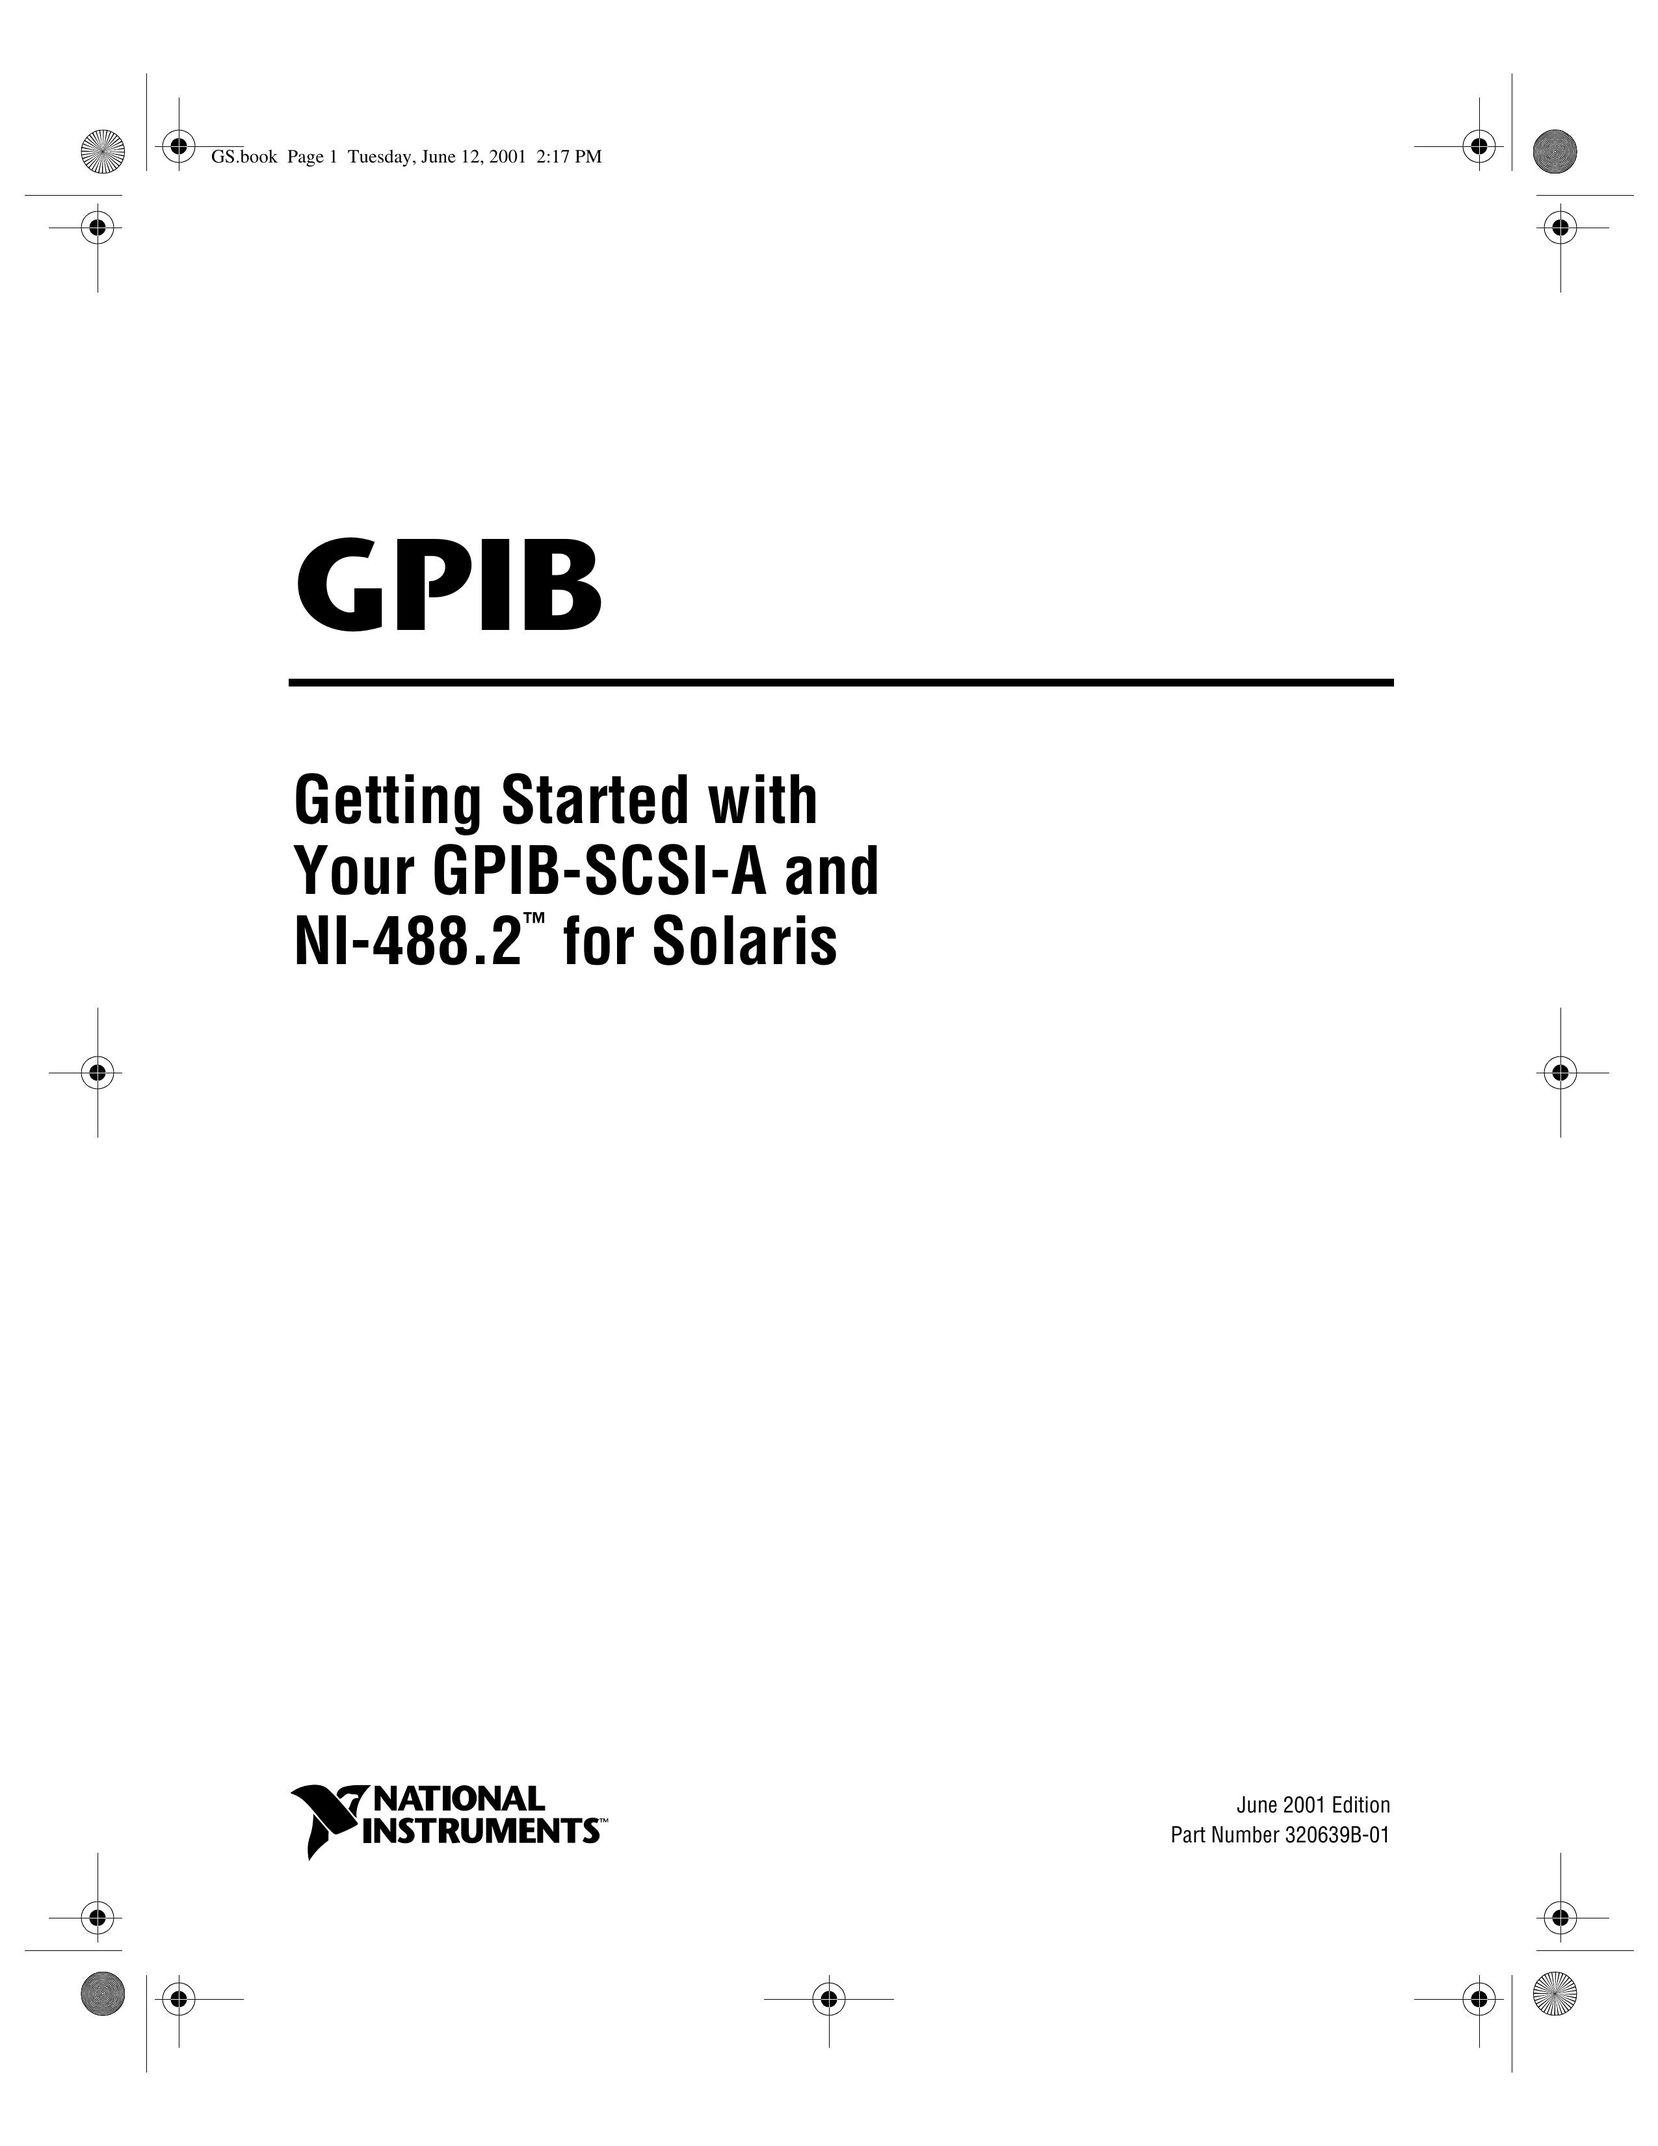 National Instruments GPIB-SCSI-A Network Card User Manual